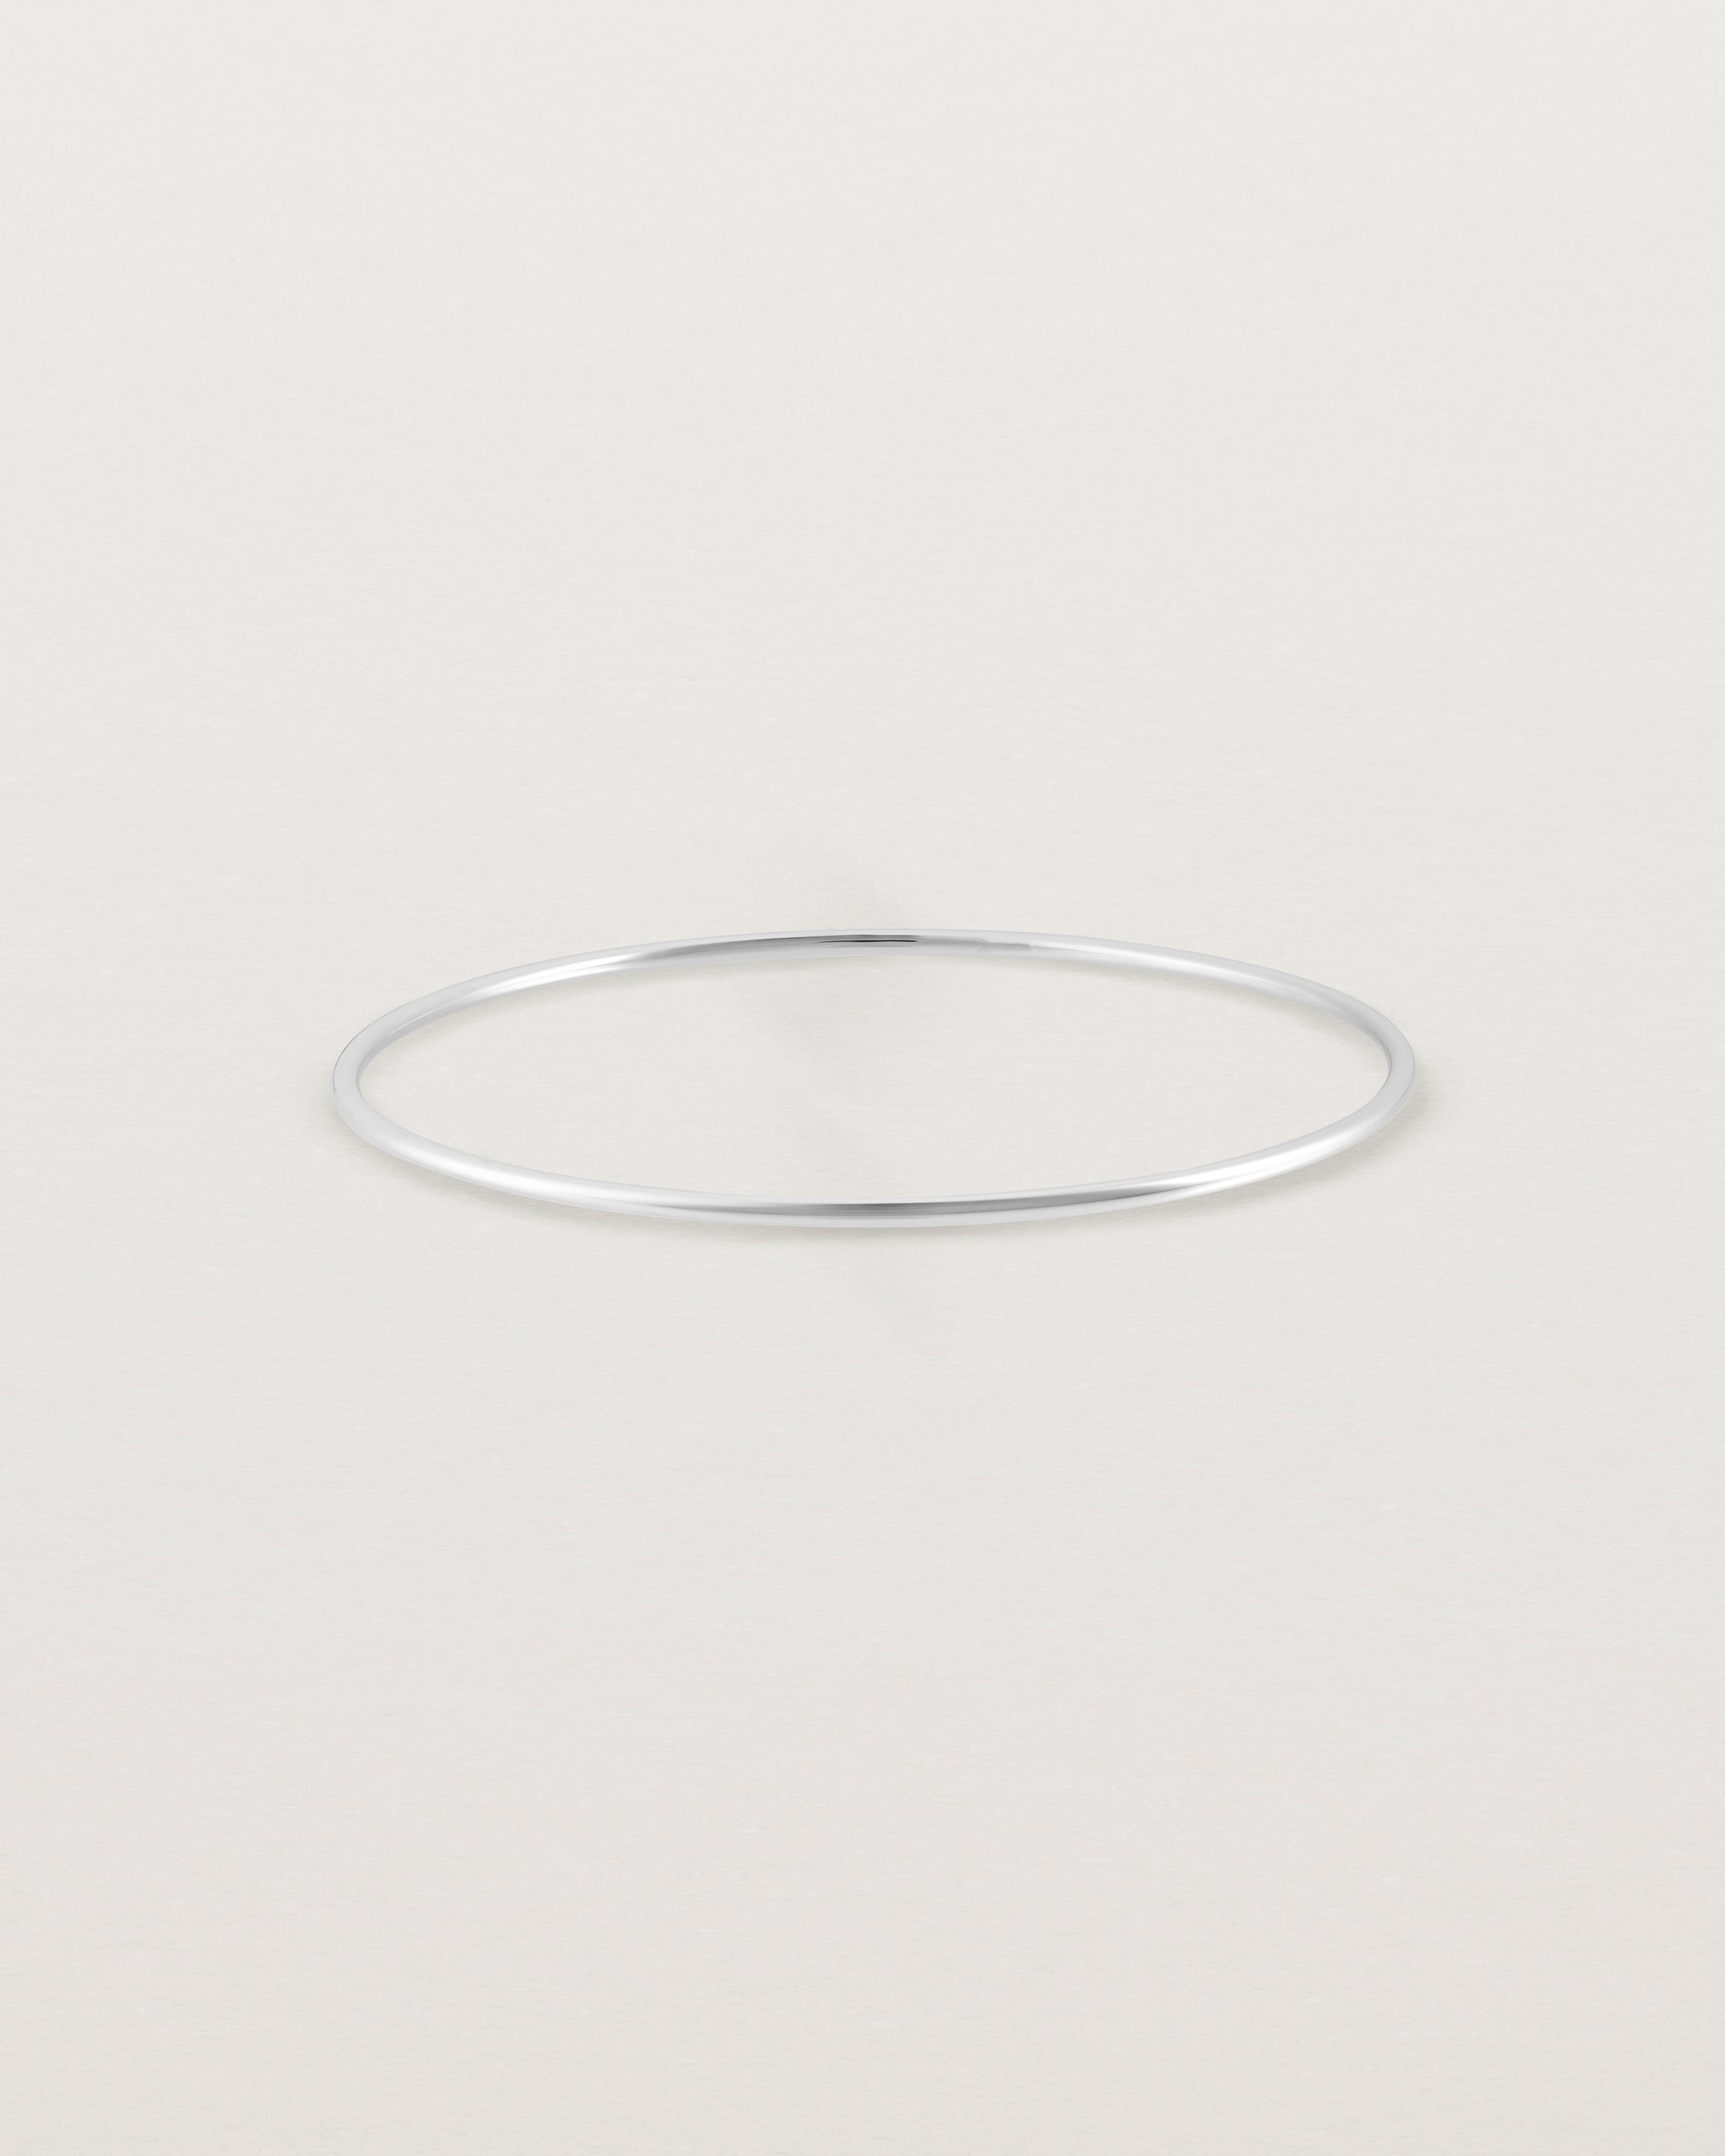 Front view of the Oval Bangle in Sterling Silver.